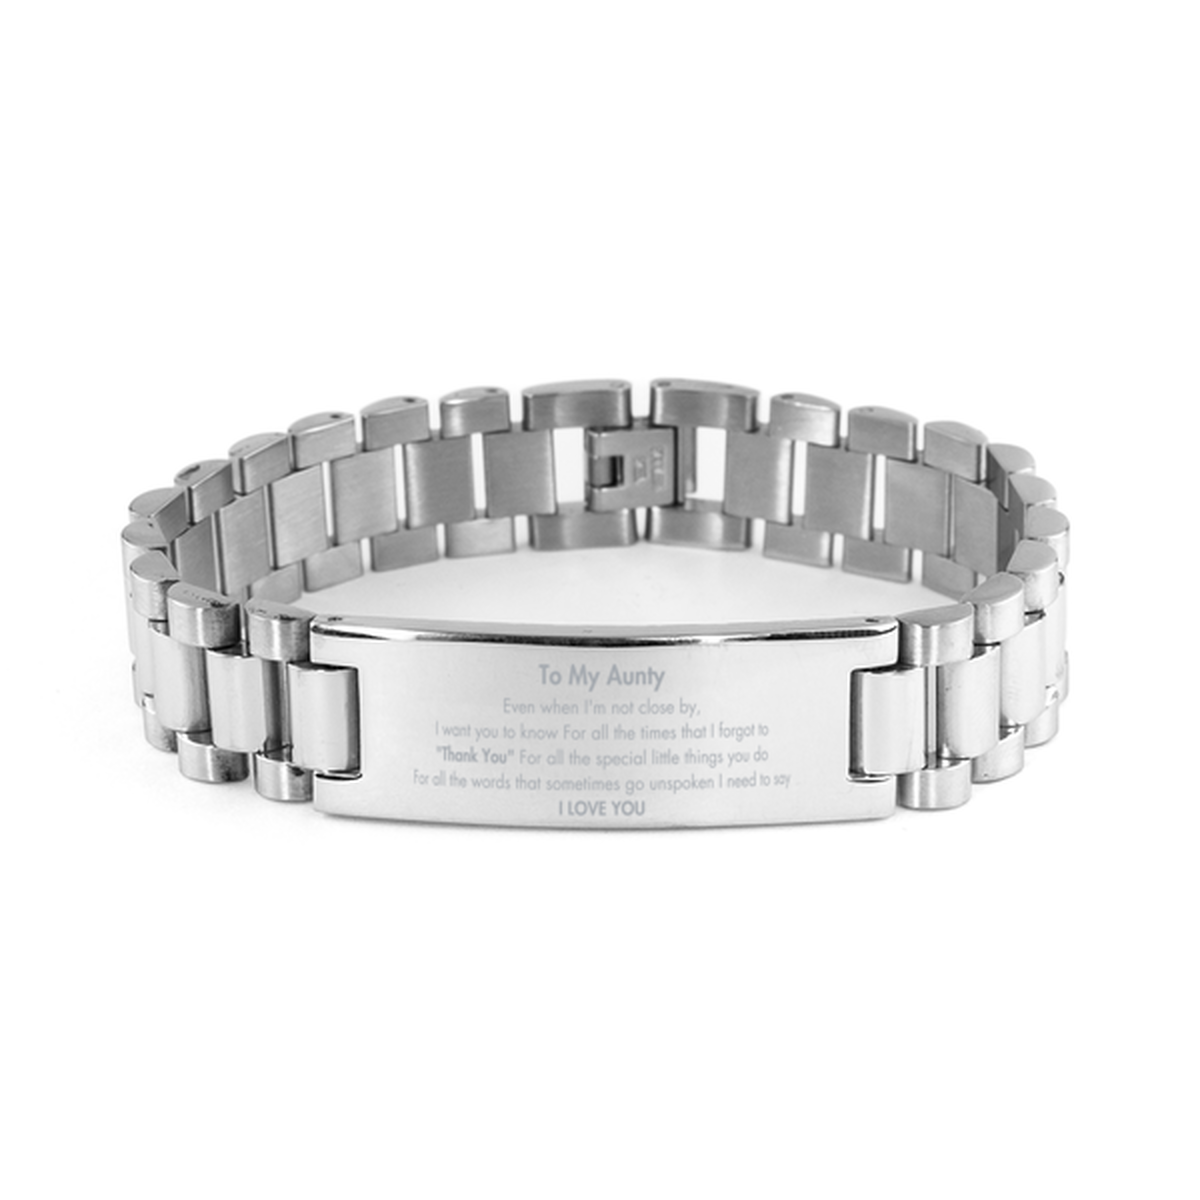 Thank You Gifts for Aunty, Keepsake Ladder Stainless Steel Bracelet Gifts for Aunty Birthday Mother's day Father's Day Aunty For all the words That sometimes go unspoken I need to say I LOVE YOU